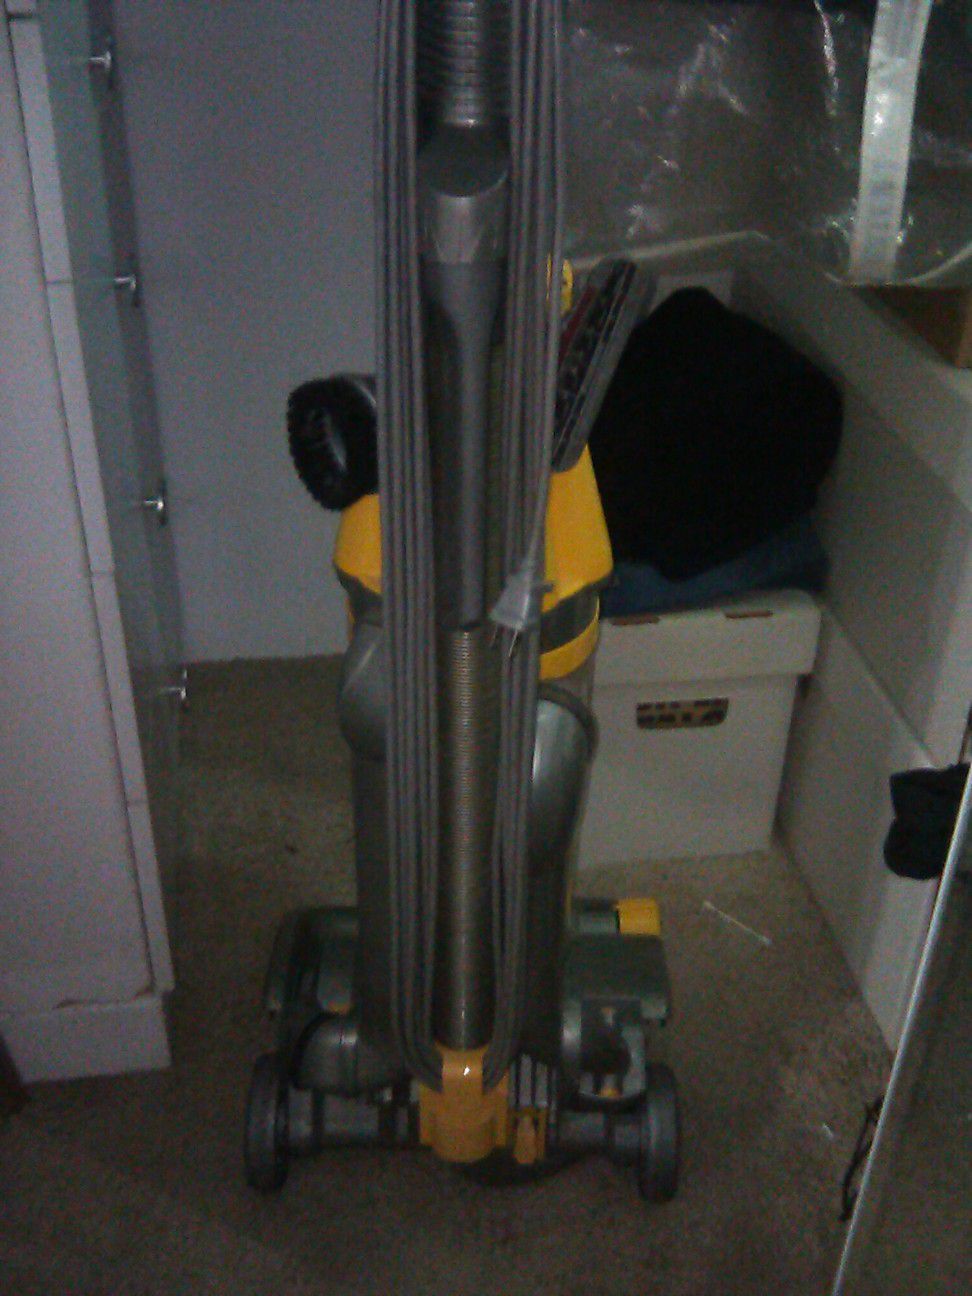 Dyson DC07 all floors bagless vacuum cleaner. Upright with all attachments